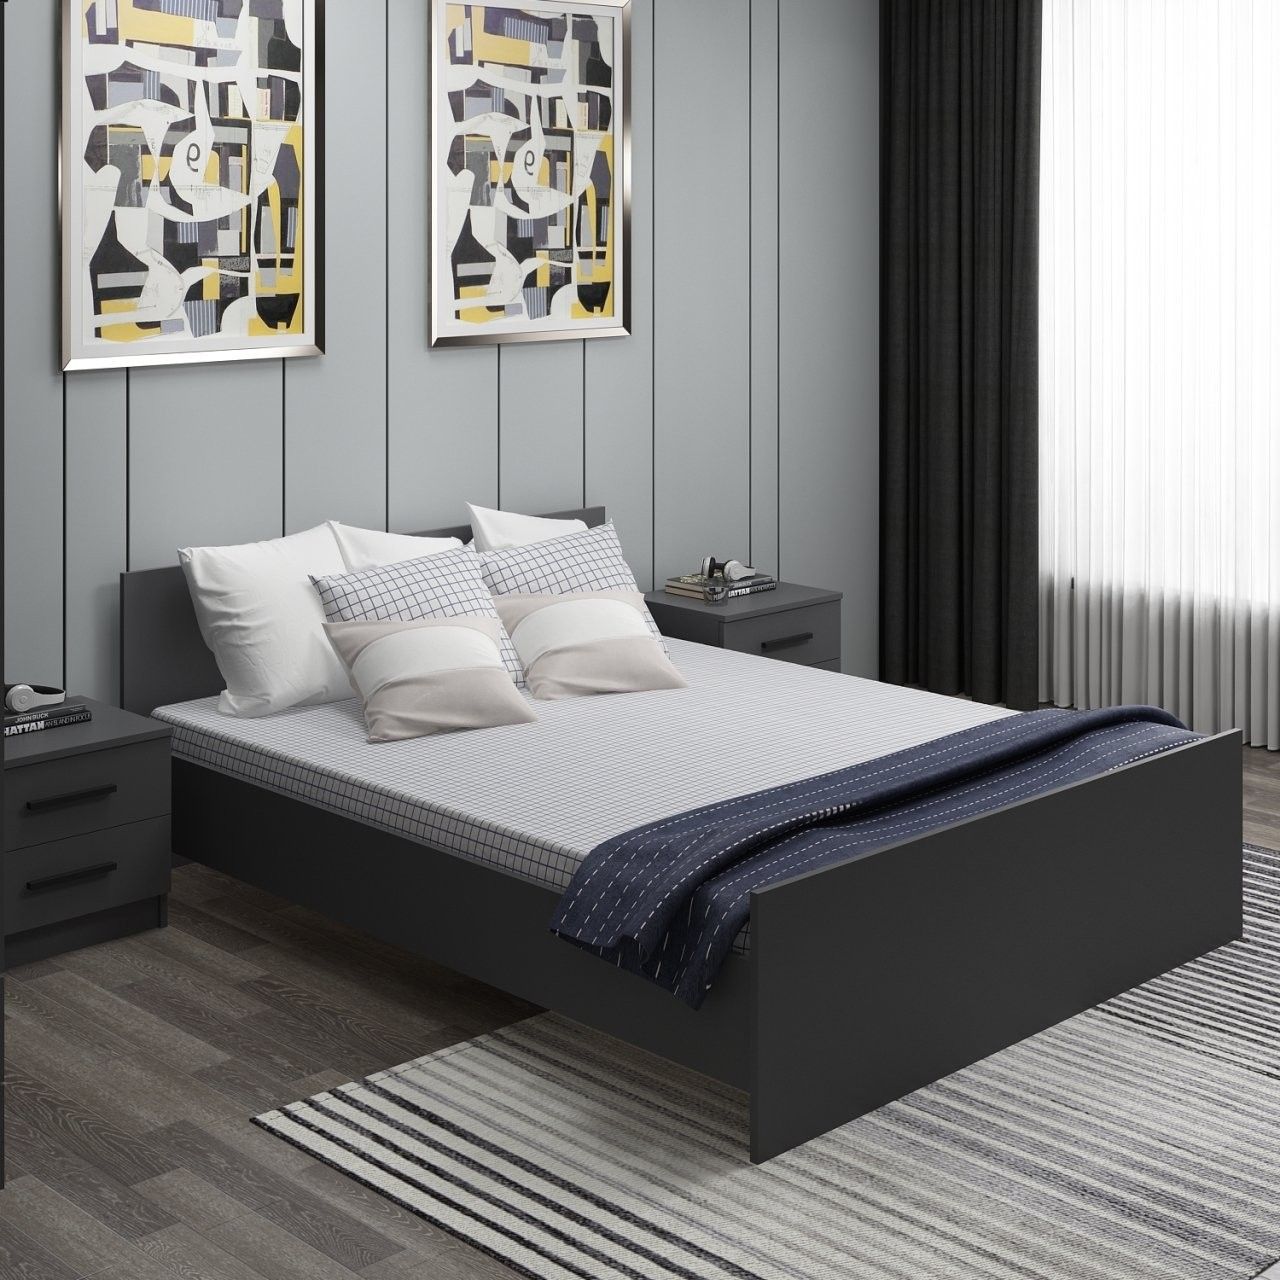 Kale Bedstead 160 x 200 - Anthracite - Double Bedstead